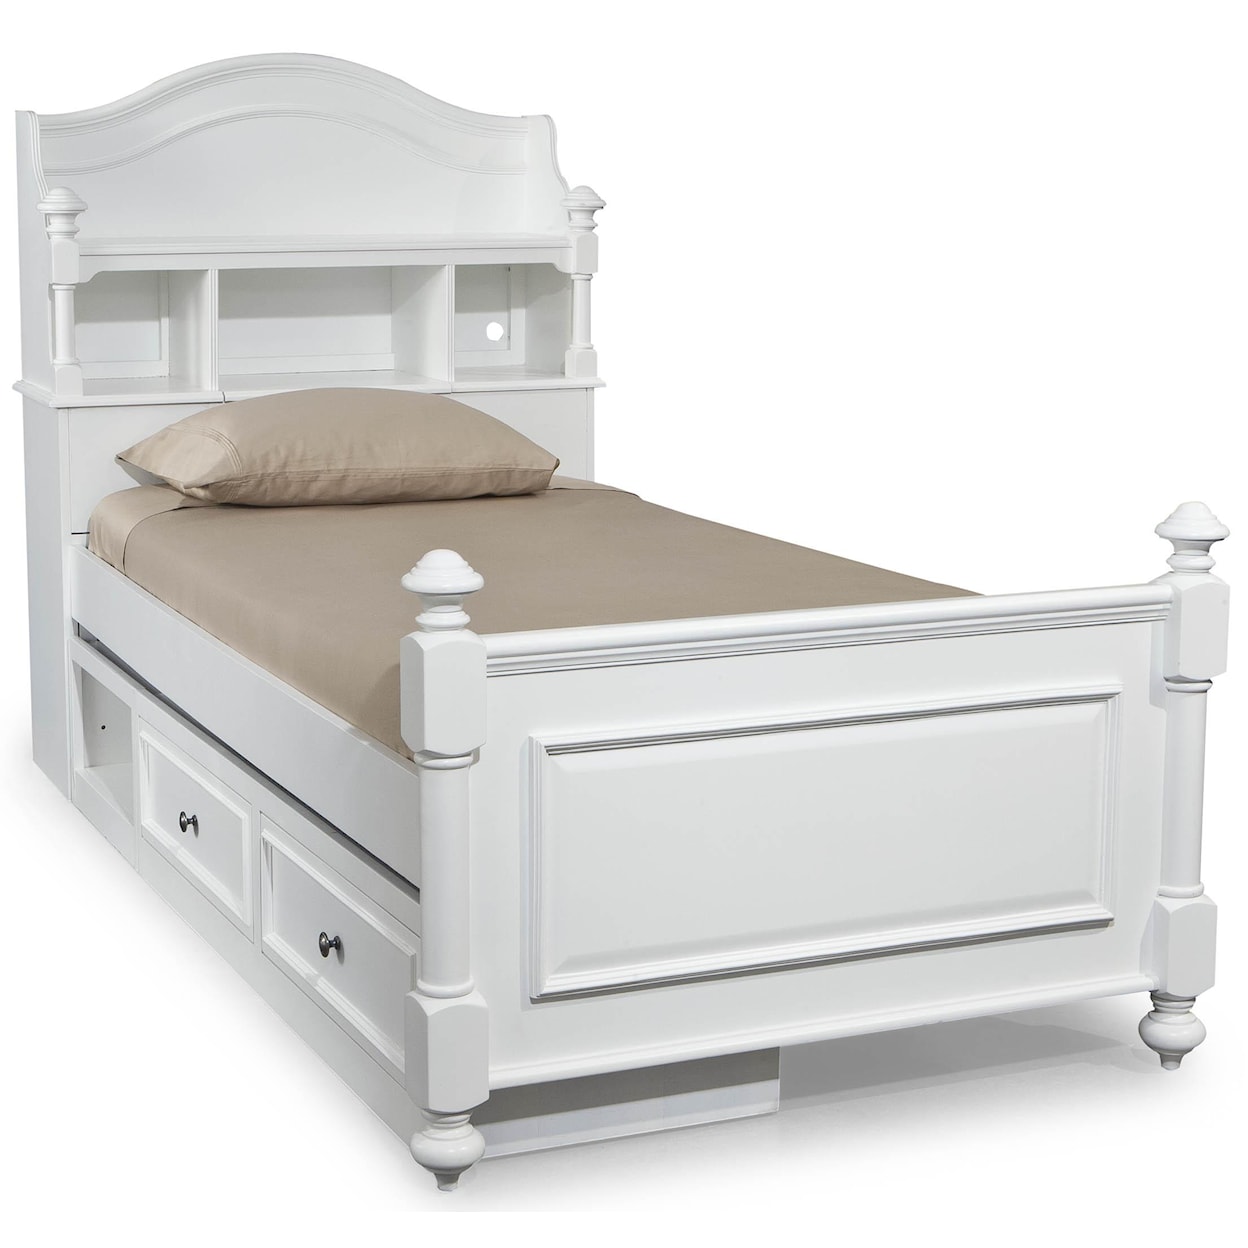 Bed Frame, Box + Mattress Full Size for Sale in Jersey City, NJ